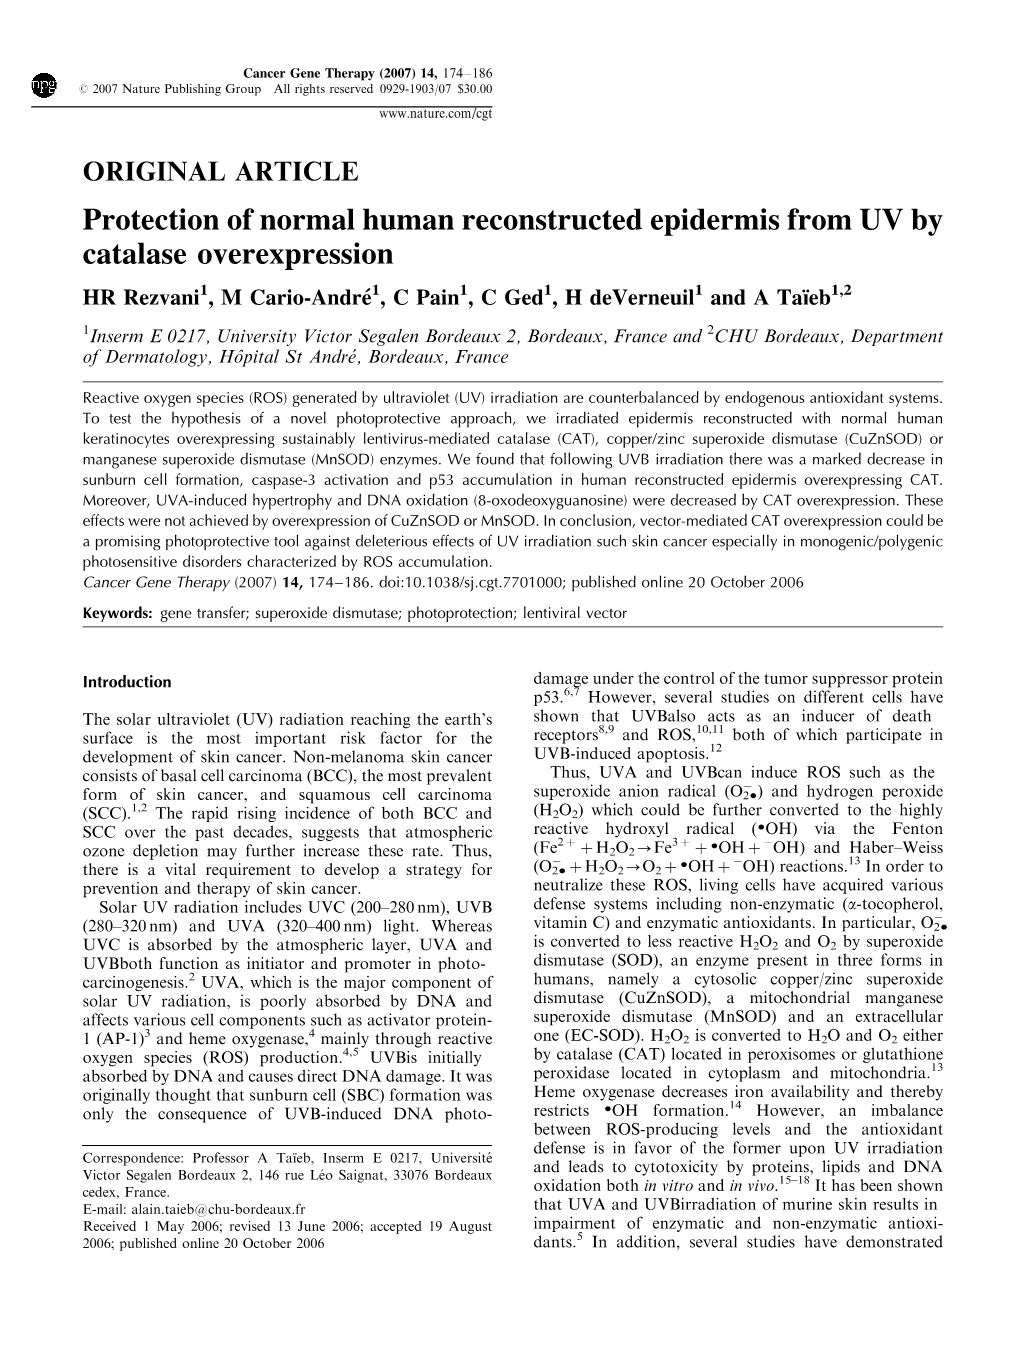 Protection of Normal Human Reconstructed Epidermis from UV By